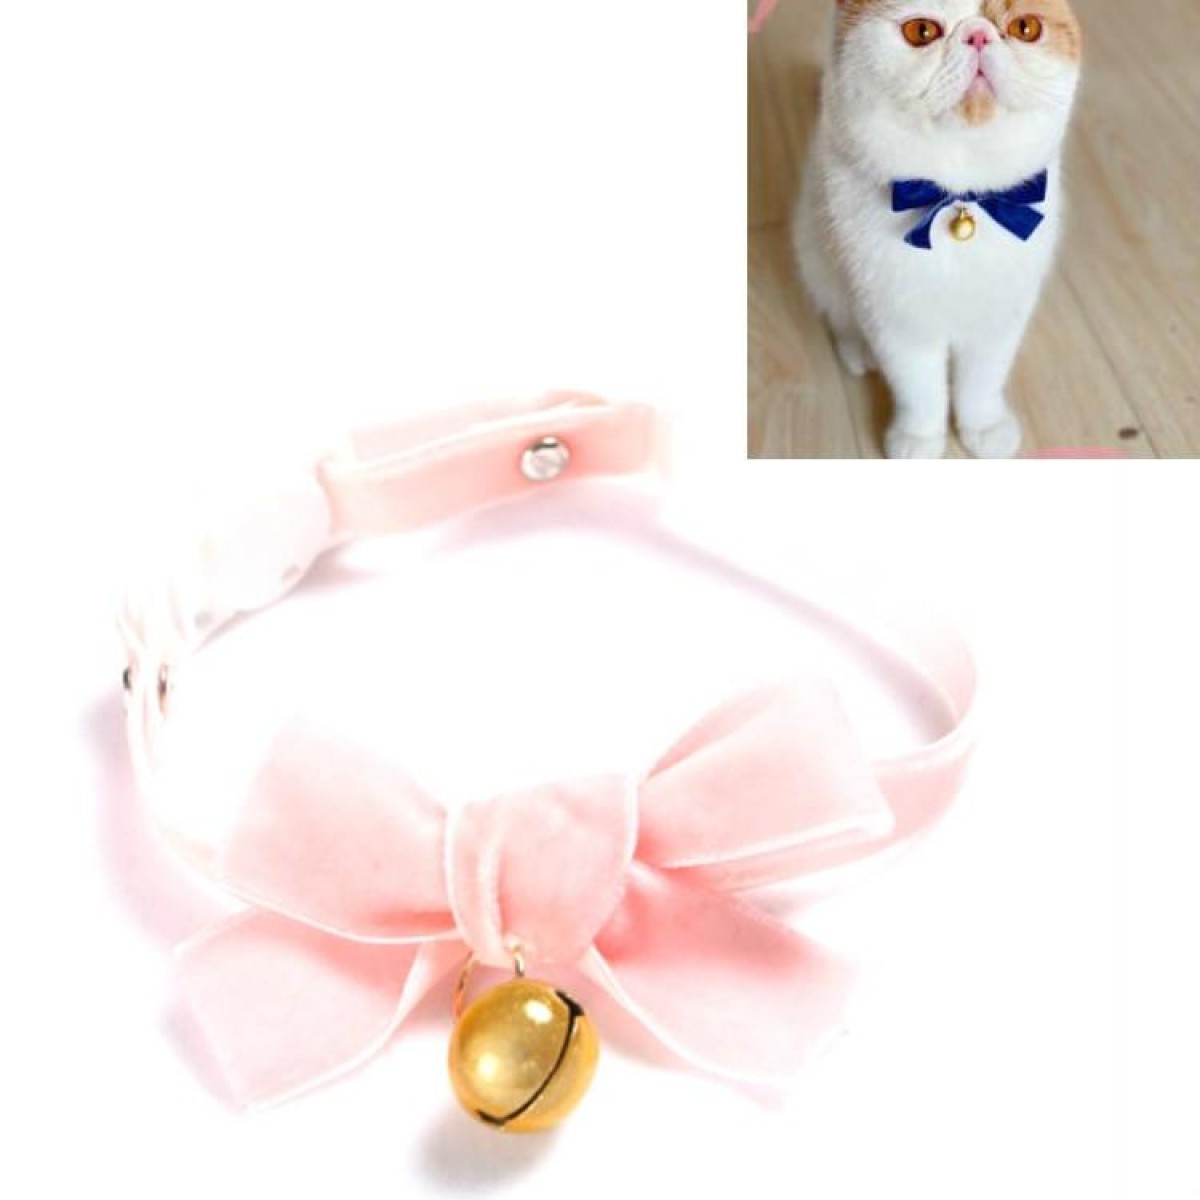 Velvet Bowknot Adjustable Pet Collar Cat Dog Rabbit Bow Tie Accessories, Size:S 17-30cm, Style:Bowknot With Bell(Pink)